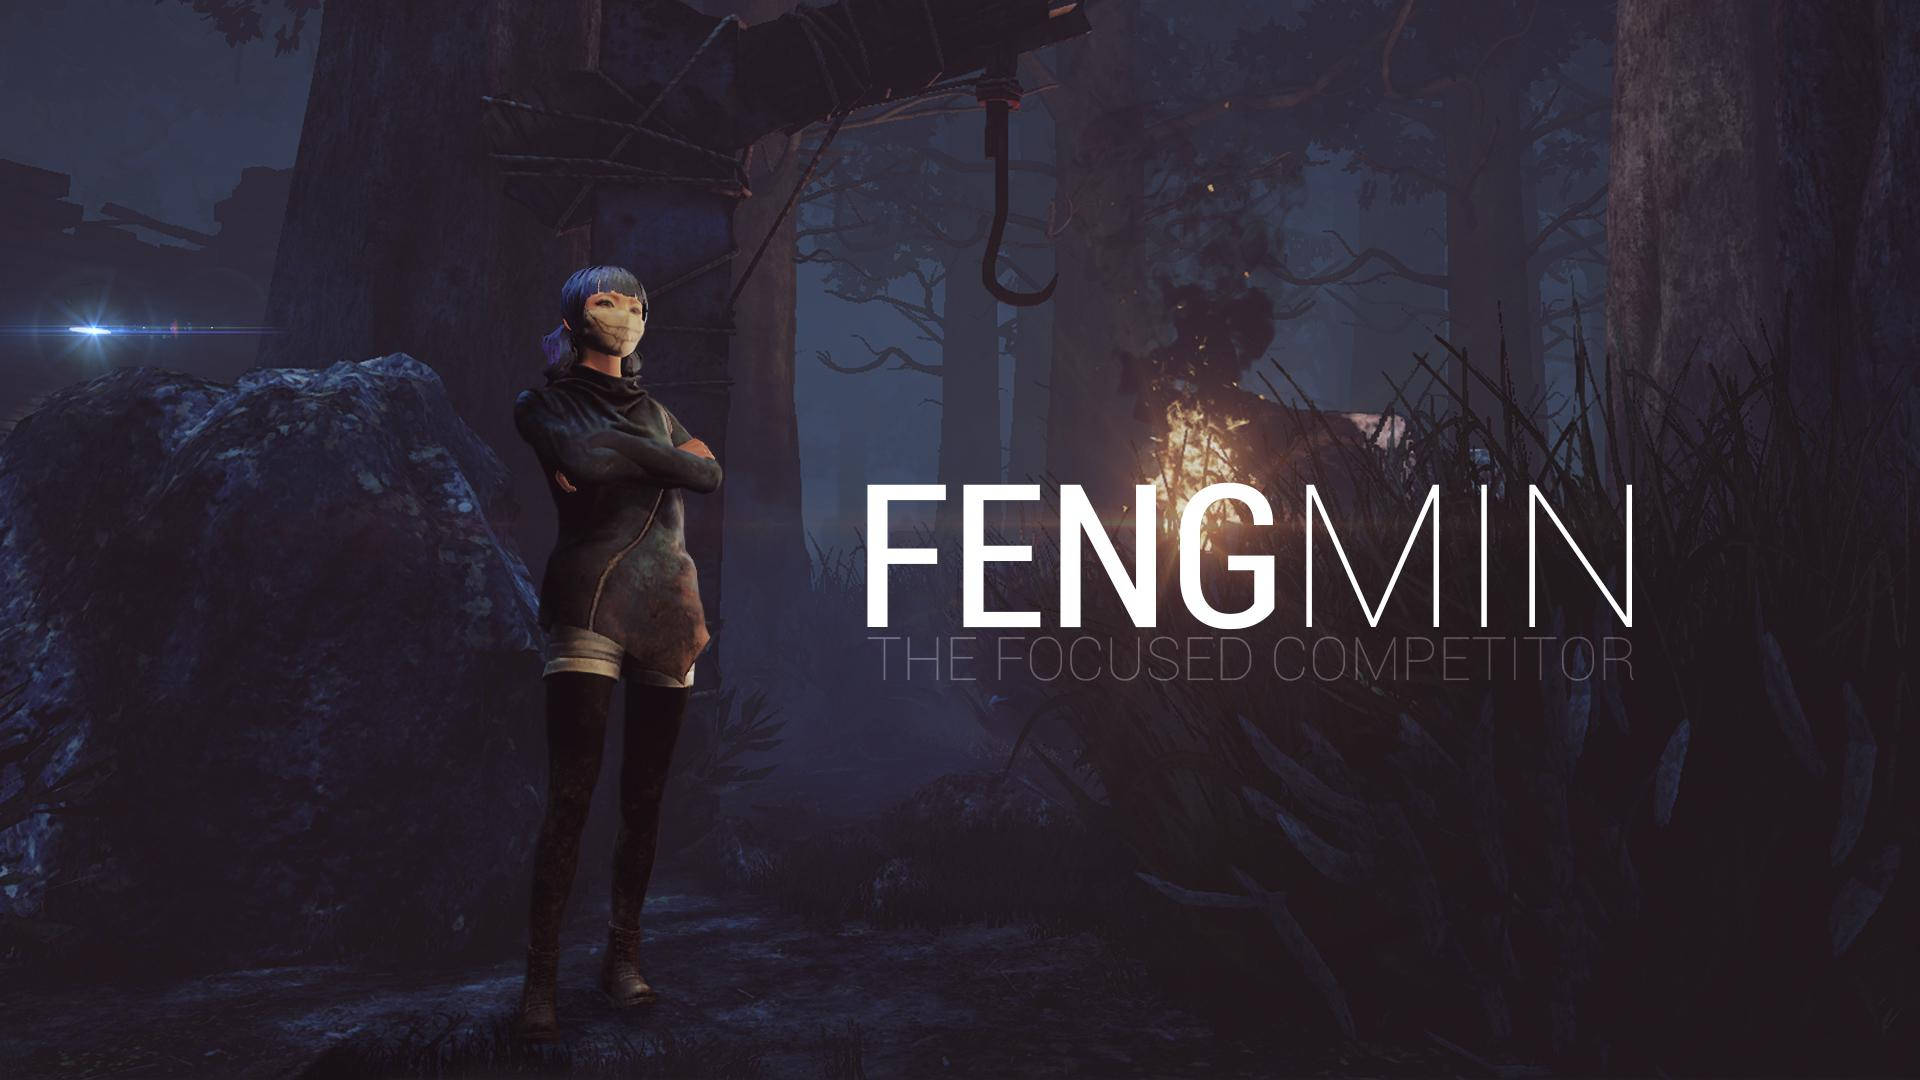 Join Feng Min in her thrilling fight against terror in Dead by Daylight Wallpaper